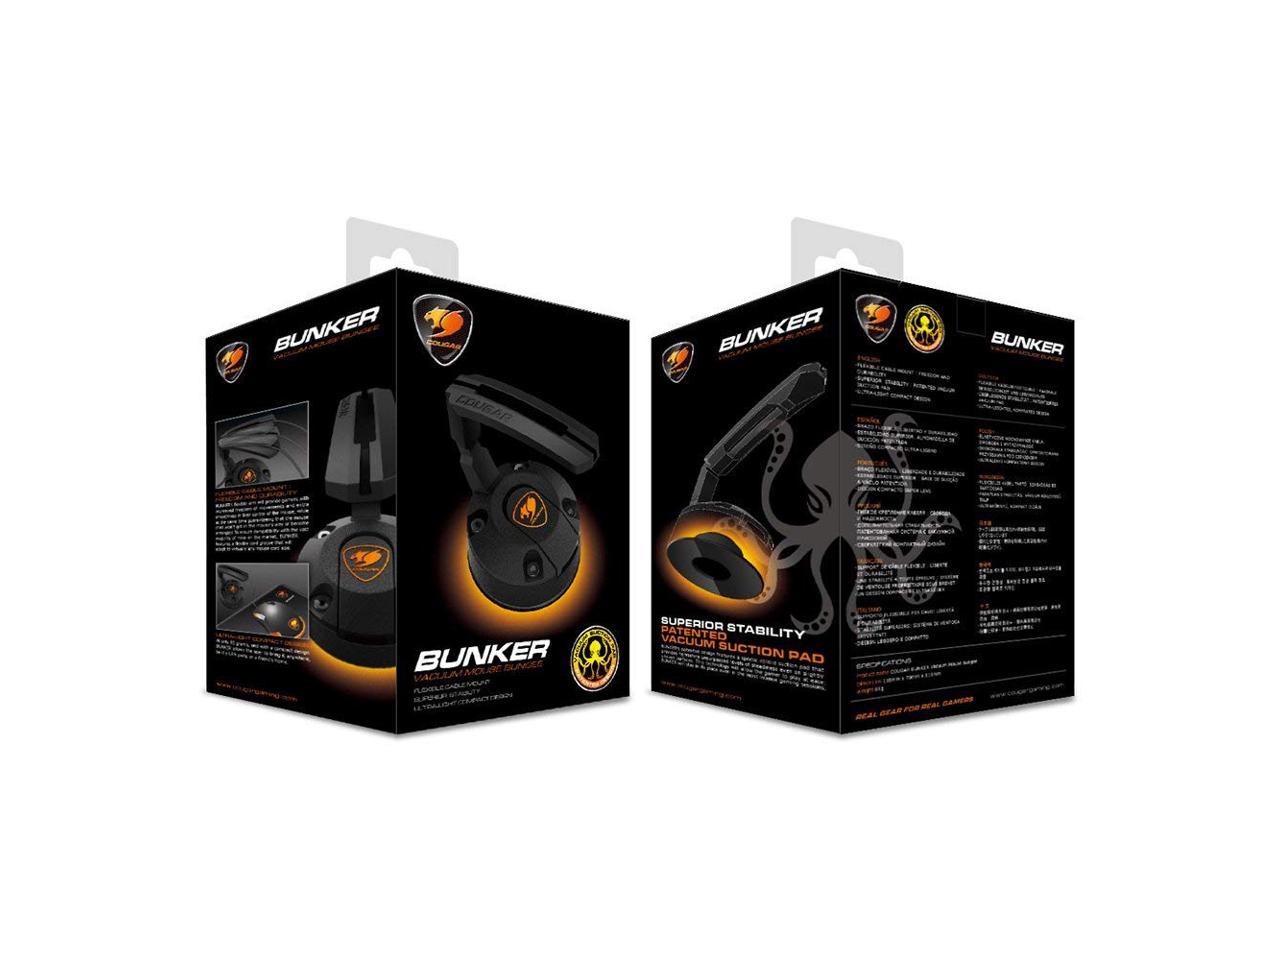 Cougar Bunker vide Gaming Mouse Bungee 